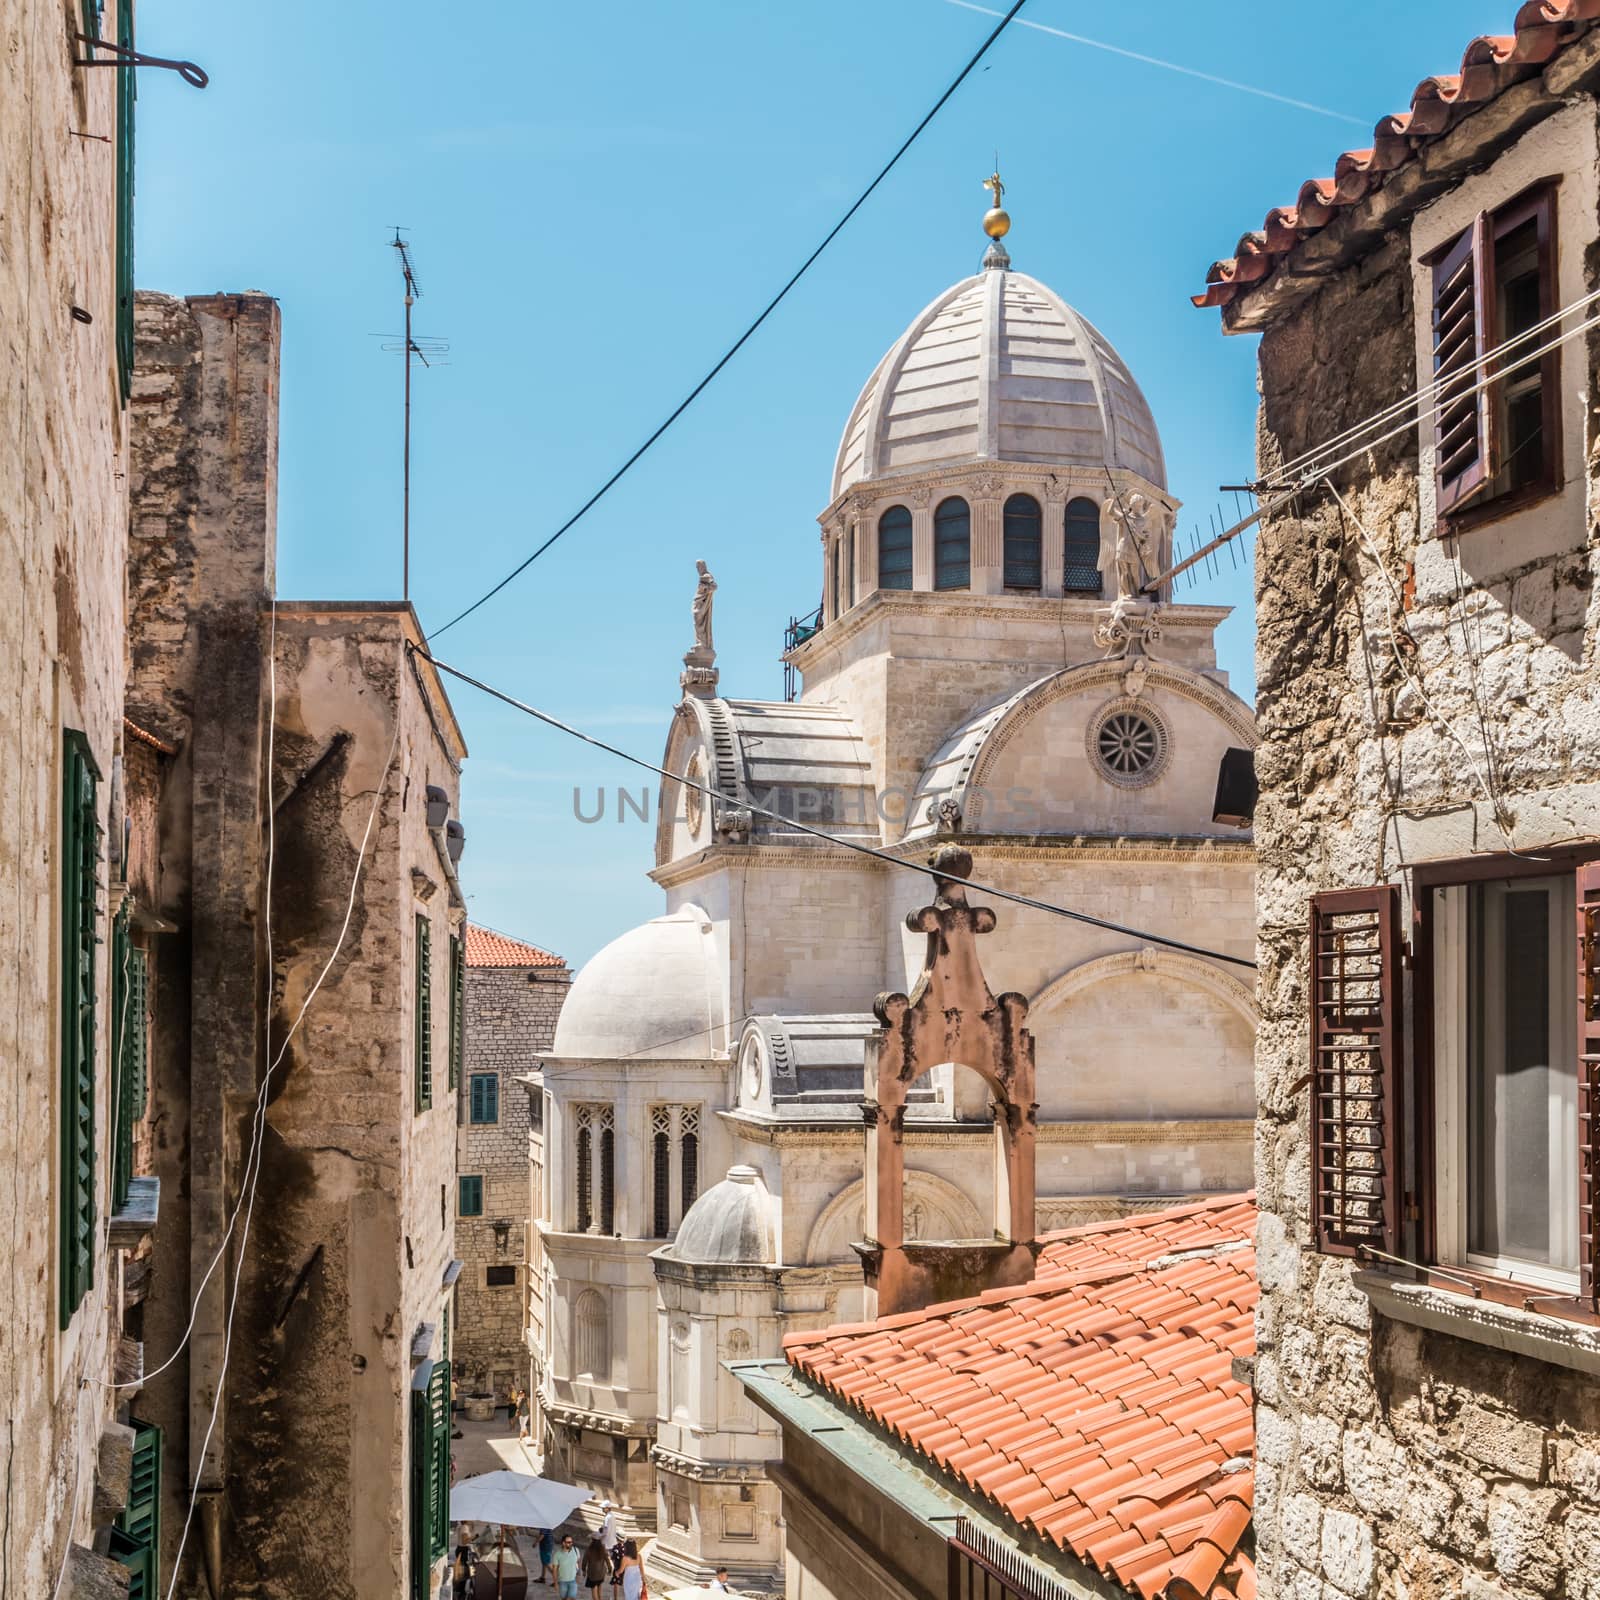 Croatia, city of Sibenik, panoramic view of the old town center and cathedral of St James, most important architectural monument of the Renaissance era in Croatia, UNESCO World Heritage by kasto